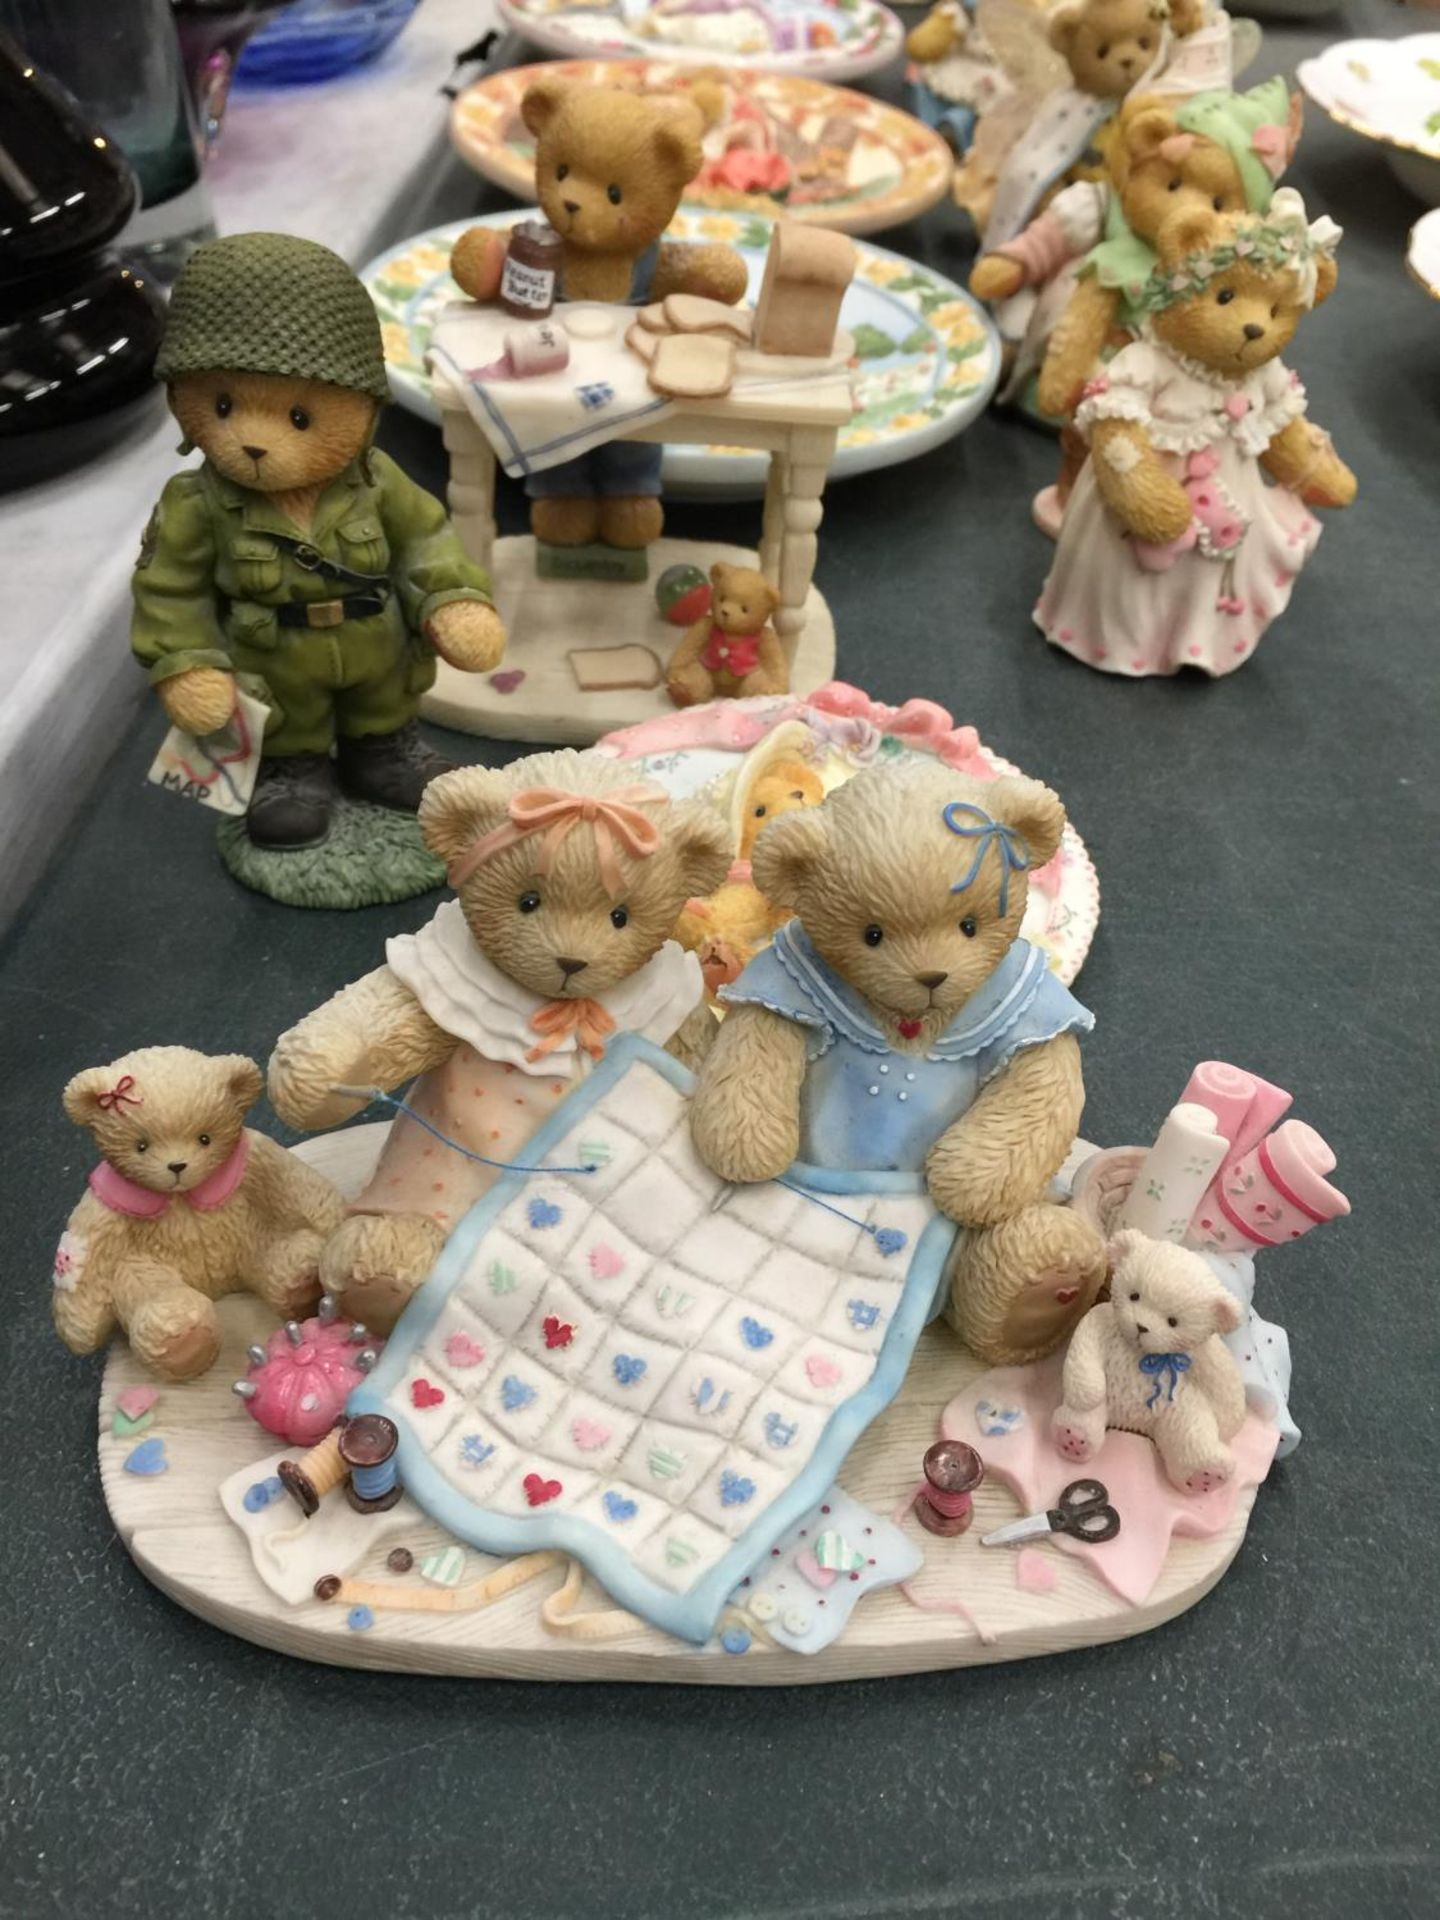 ELEVEN LIMITED EDITION CHERISHED TEDDIES PLUS FOUR CHERISHED TEDDIES LIMITED EDITION WALL PLATES - Image 2 of 6